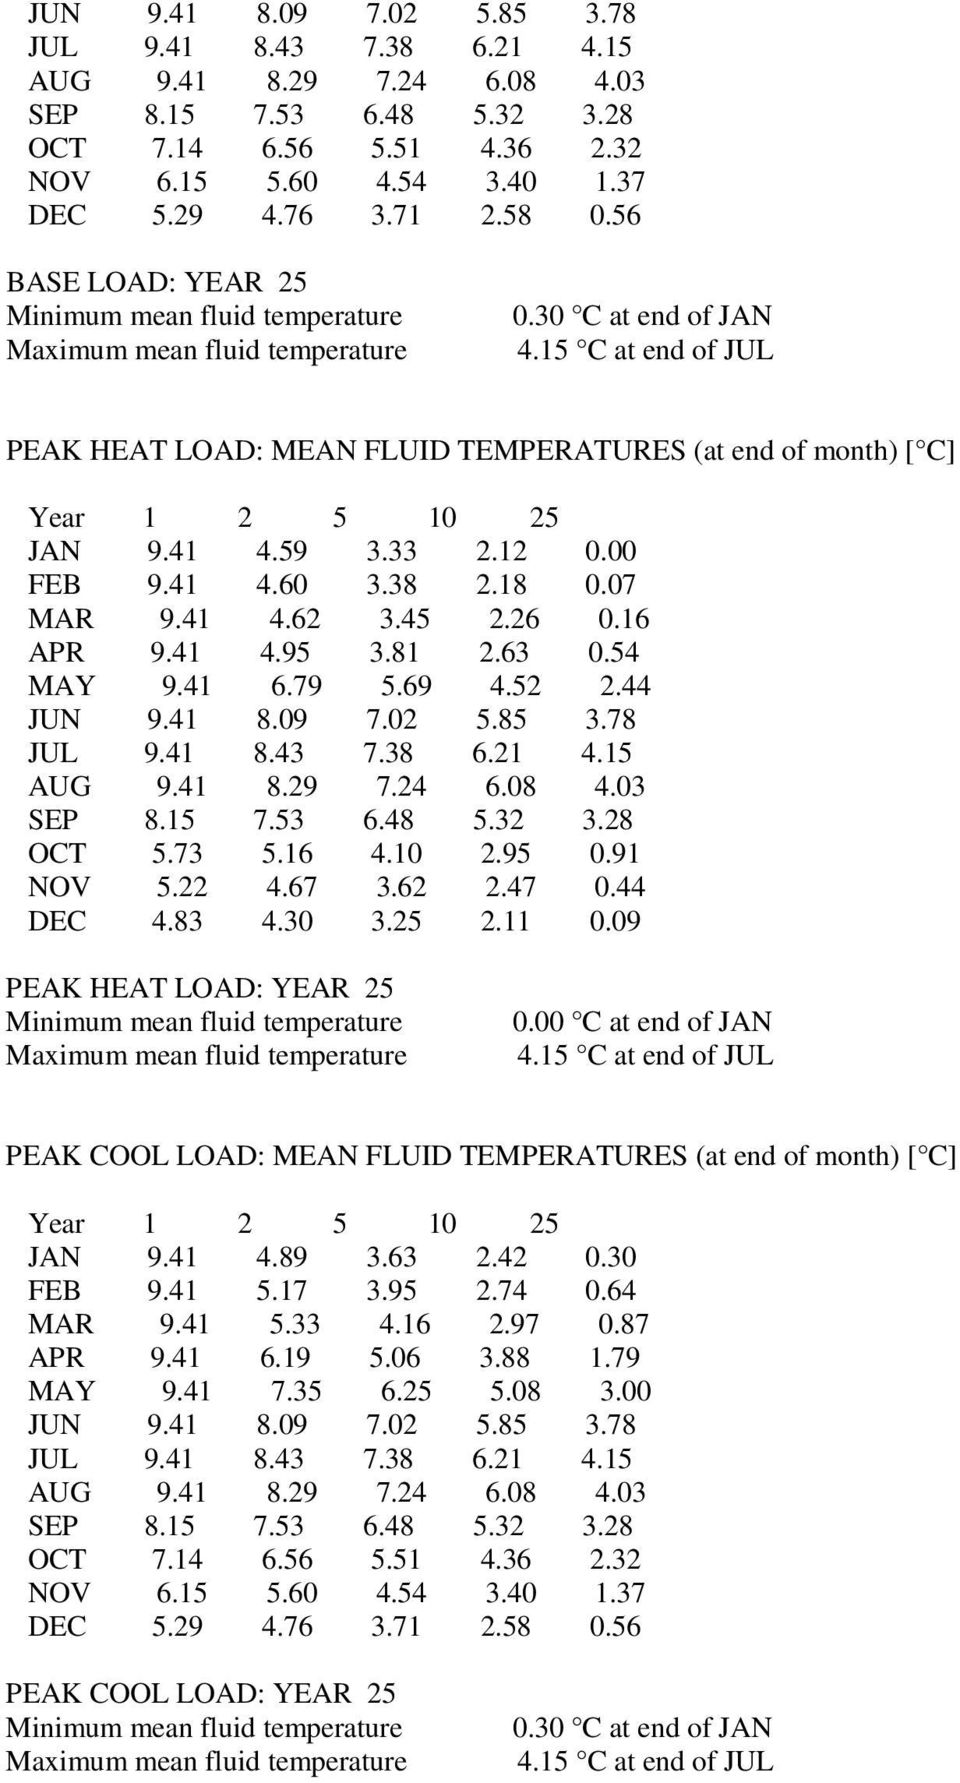 15 C at end of JUL PEAK HEAT LOAD: MEAN FLUID TEMPERATURES (at end of month) [ C] Year 1 2 5 10 25 JAN 9.41 4.59 3.33 2.12 0.00 FEB 9.41 4.60 3.38 2.18 0.07 MAR 9.41 4.62 3.45 2.26 0.16 APR 9.41 4.95 3.